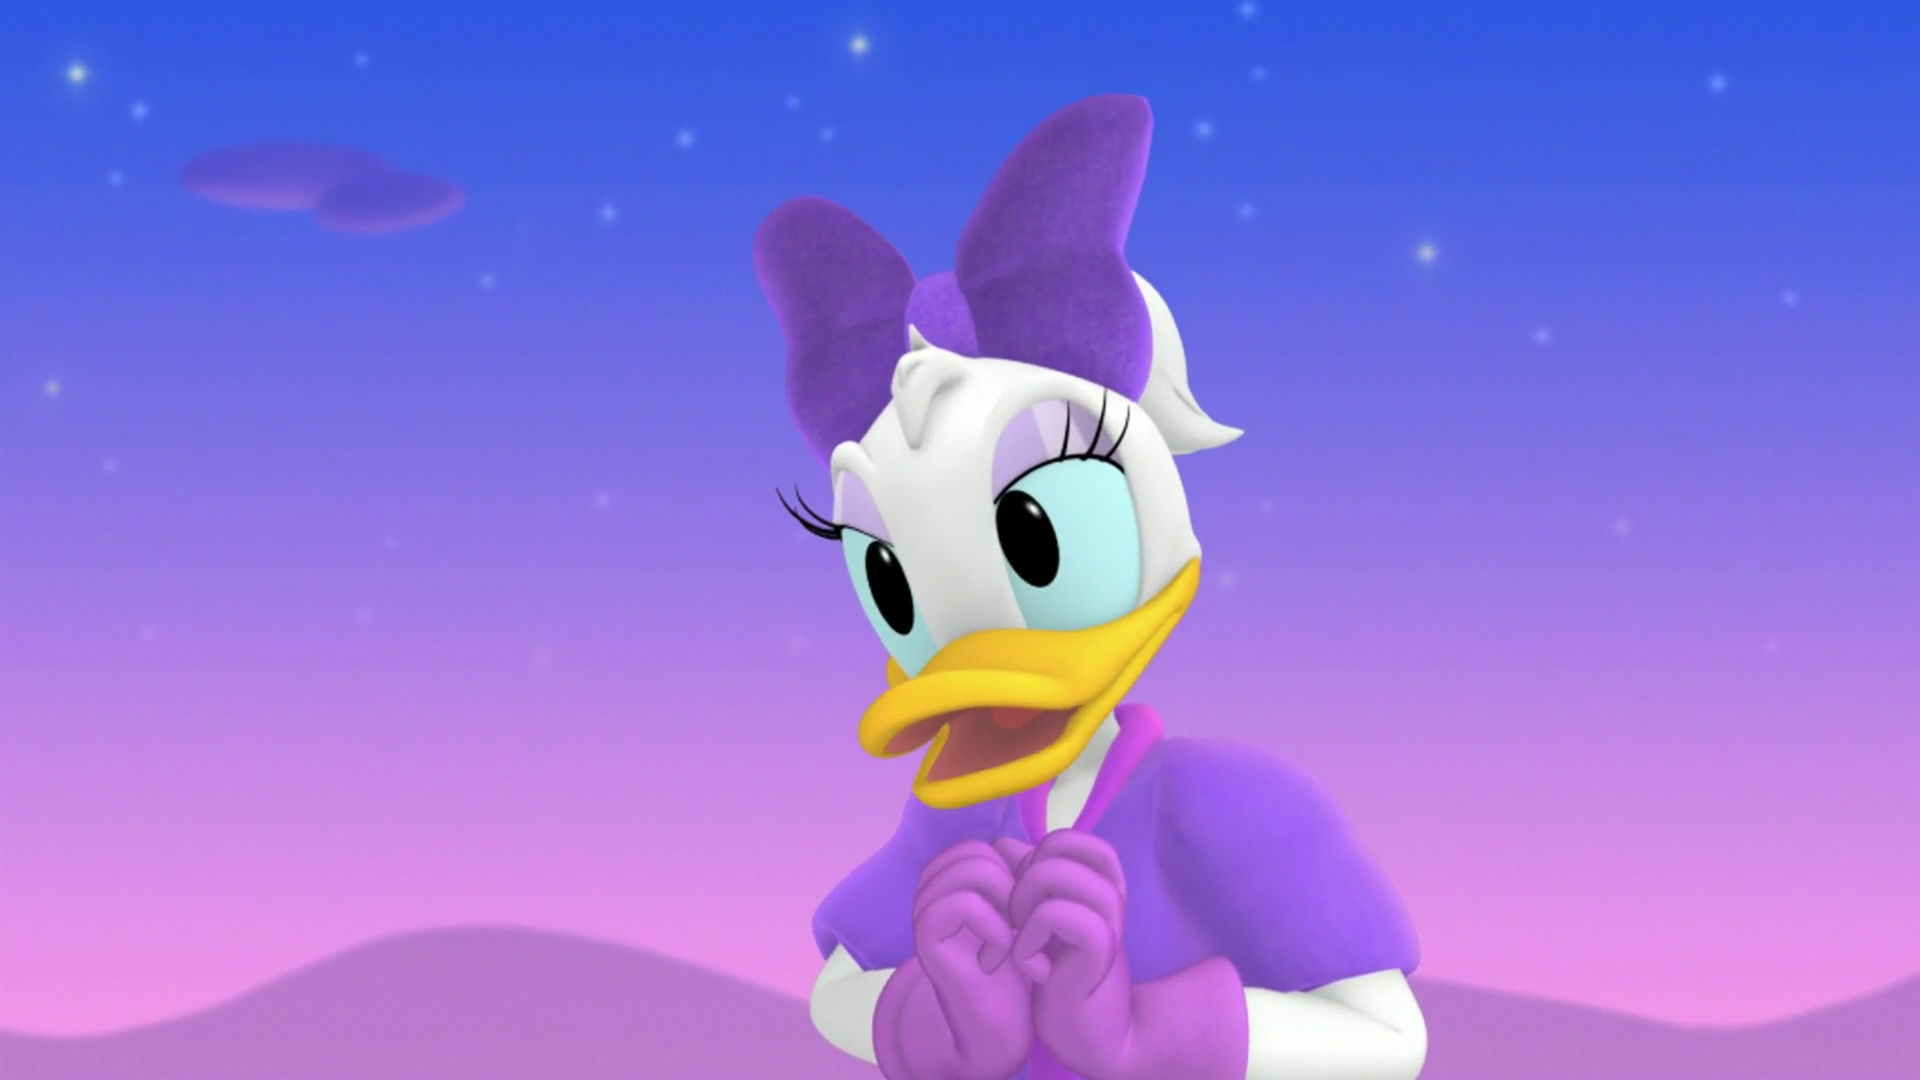 https://static.wikia.nocookie.net/disney/images/e/ee/Daisy_Duck_-_Minnierella.png/revision/latest?cb=20140215152643